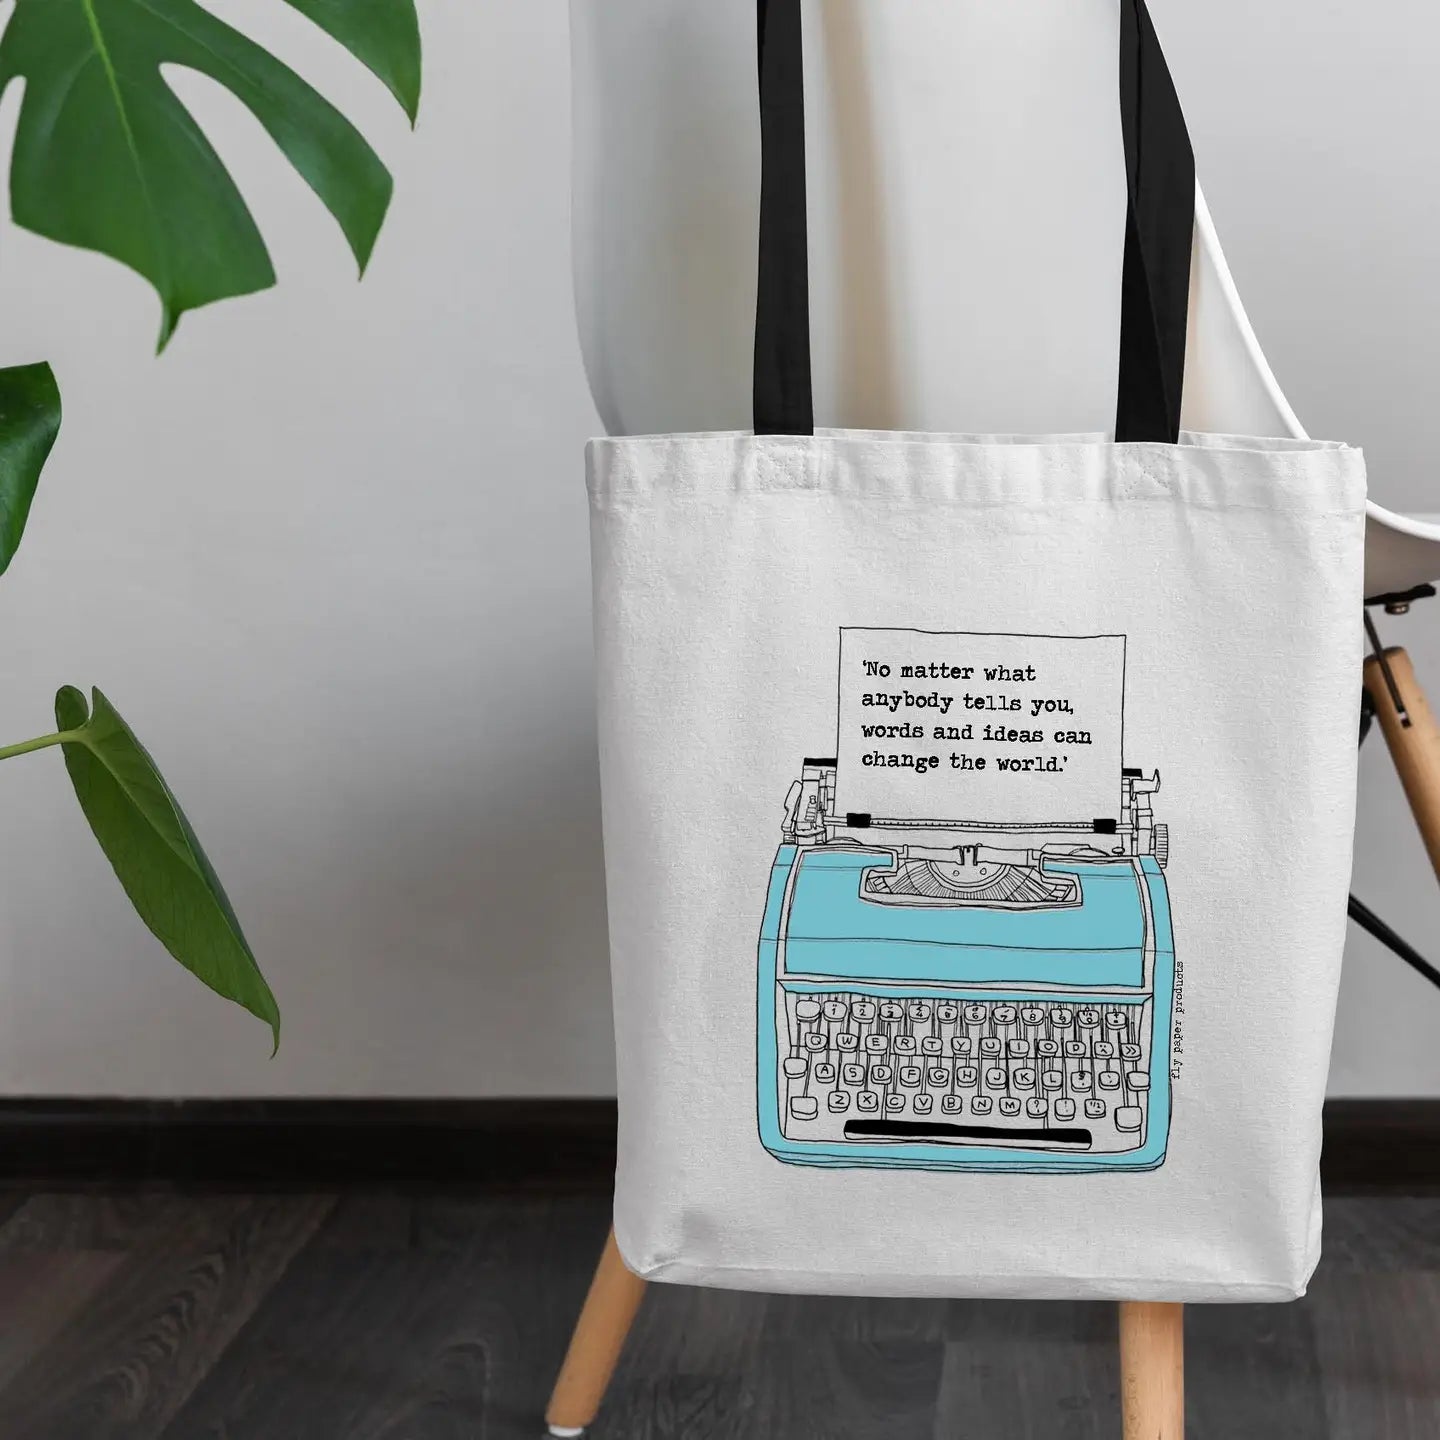 Words and Ideas Can Change The World Tote Bag